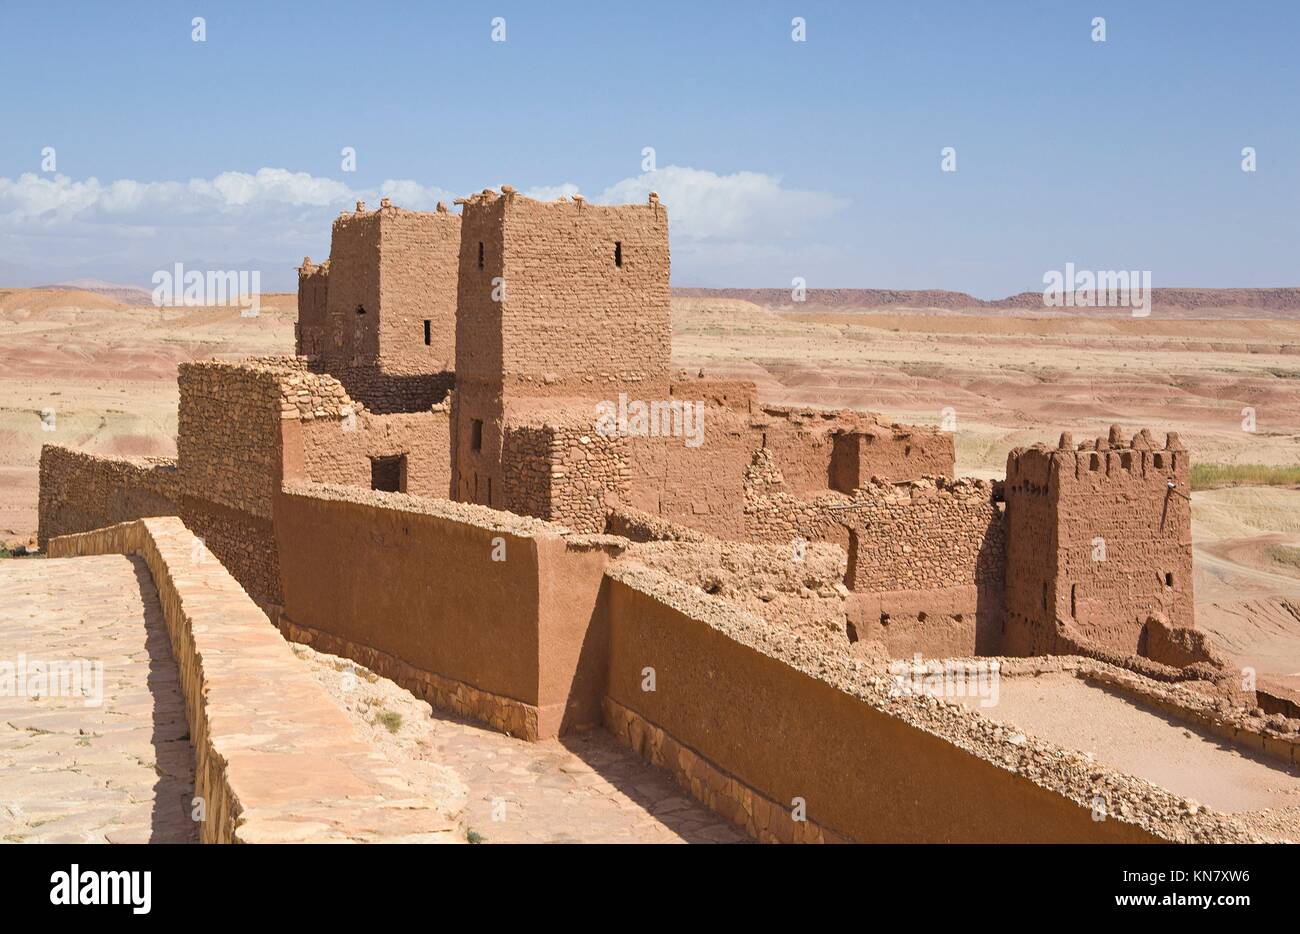 A view of the tall buildings made from clay in Ait Ben Haddou. Stock Photo